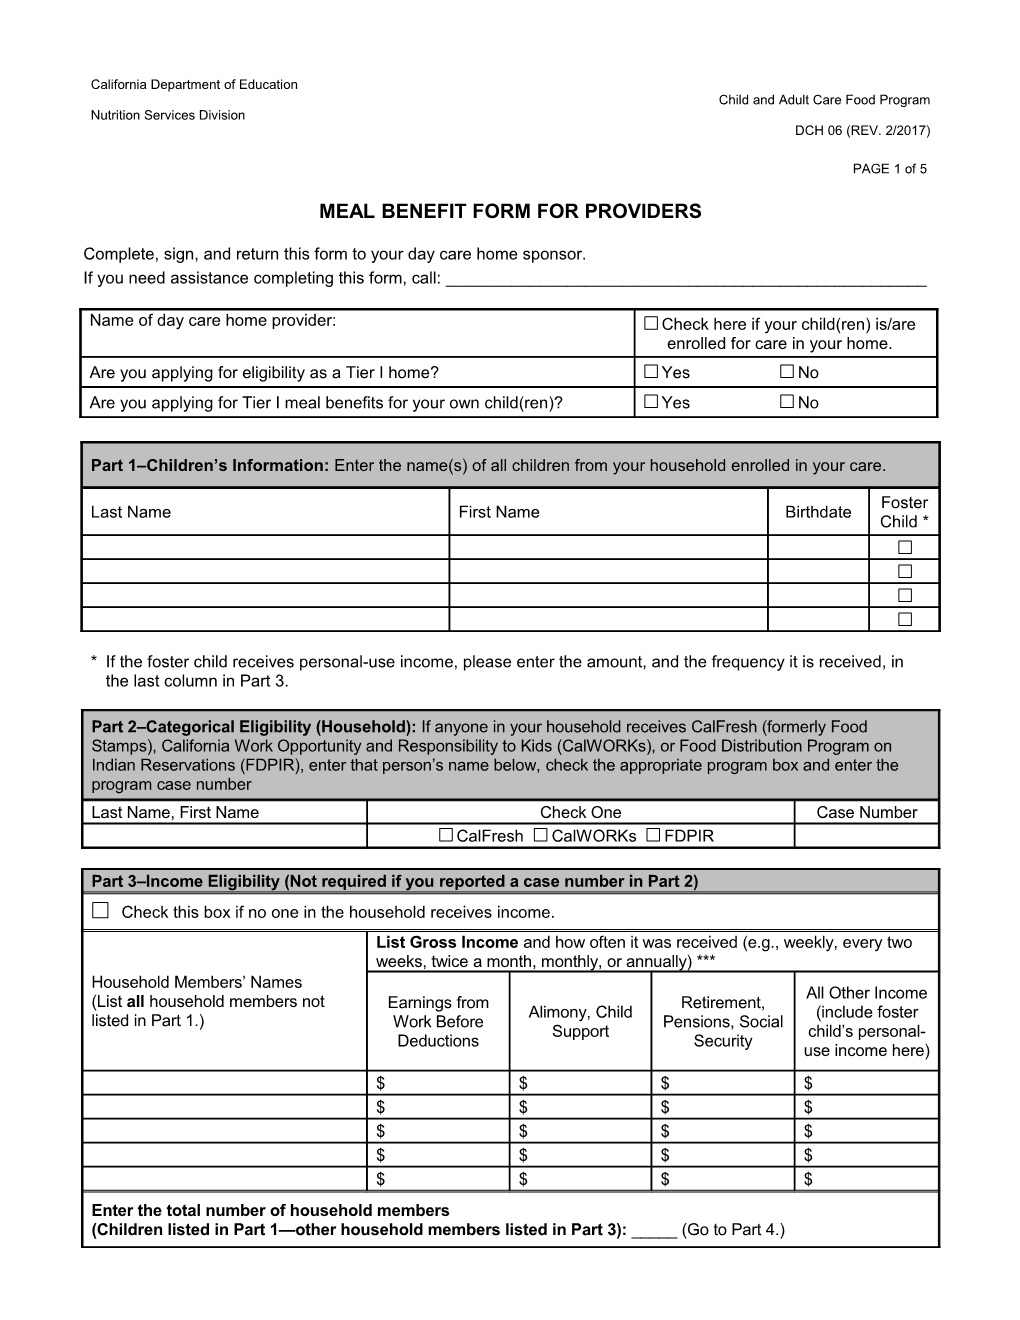 DCH Meal Benefit Form For Providers - Child And Adult Care Food Program (CA Dept Of Education)